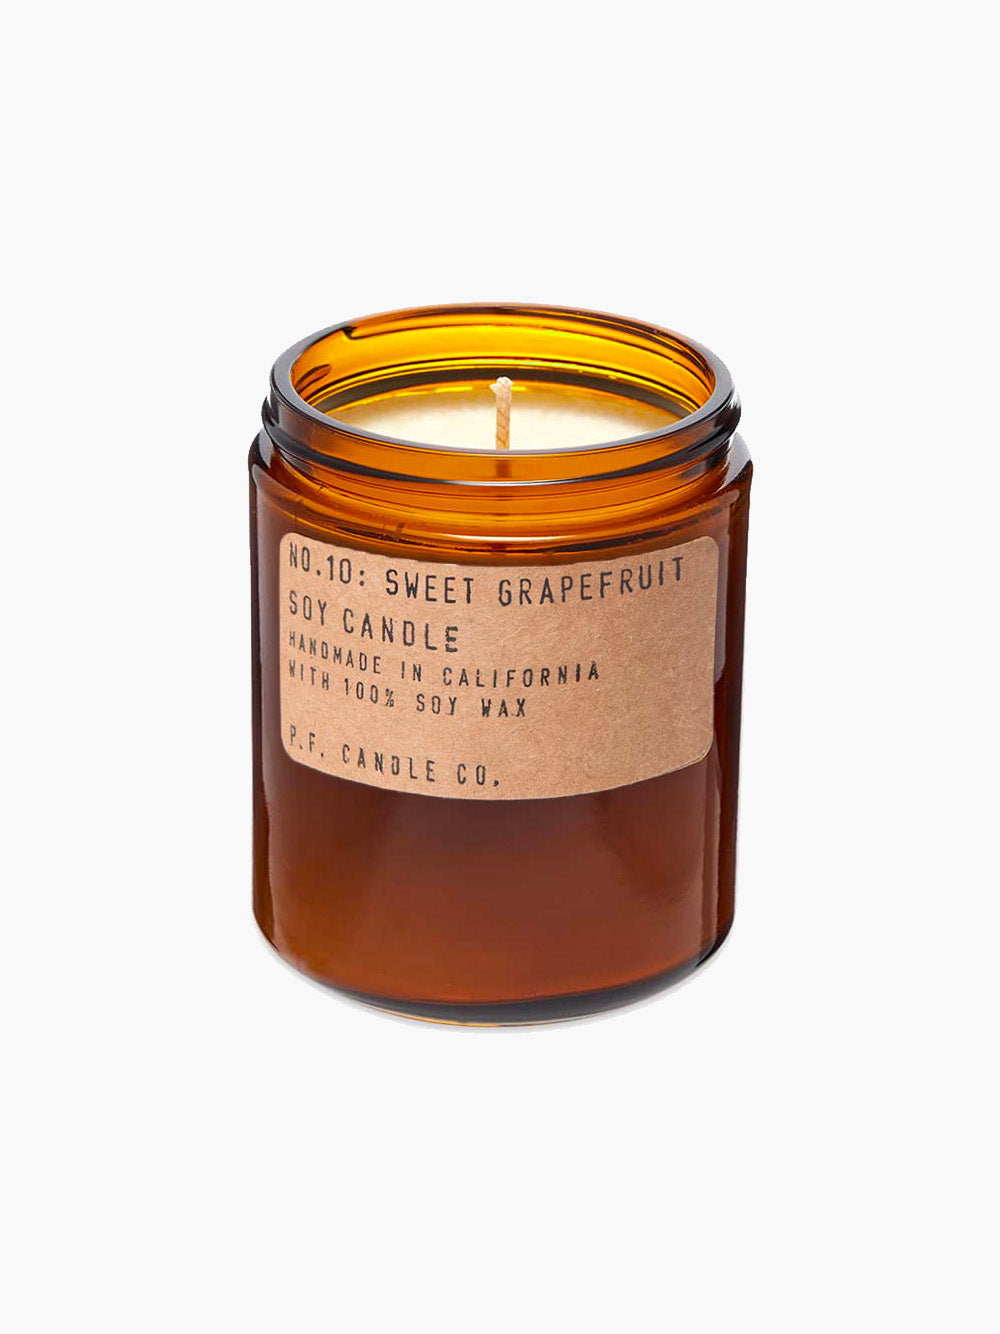 P.F. Candle Co. 204g Soy Candle - Sweet Grapefruit